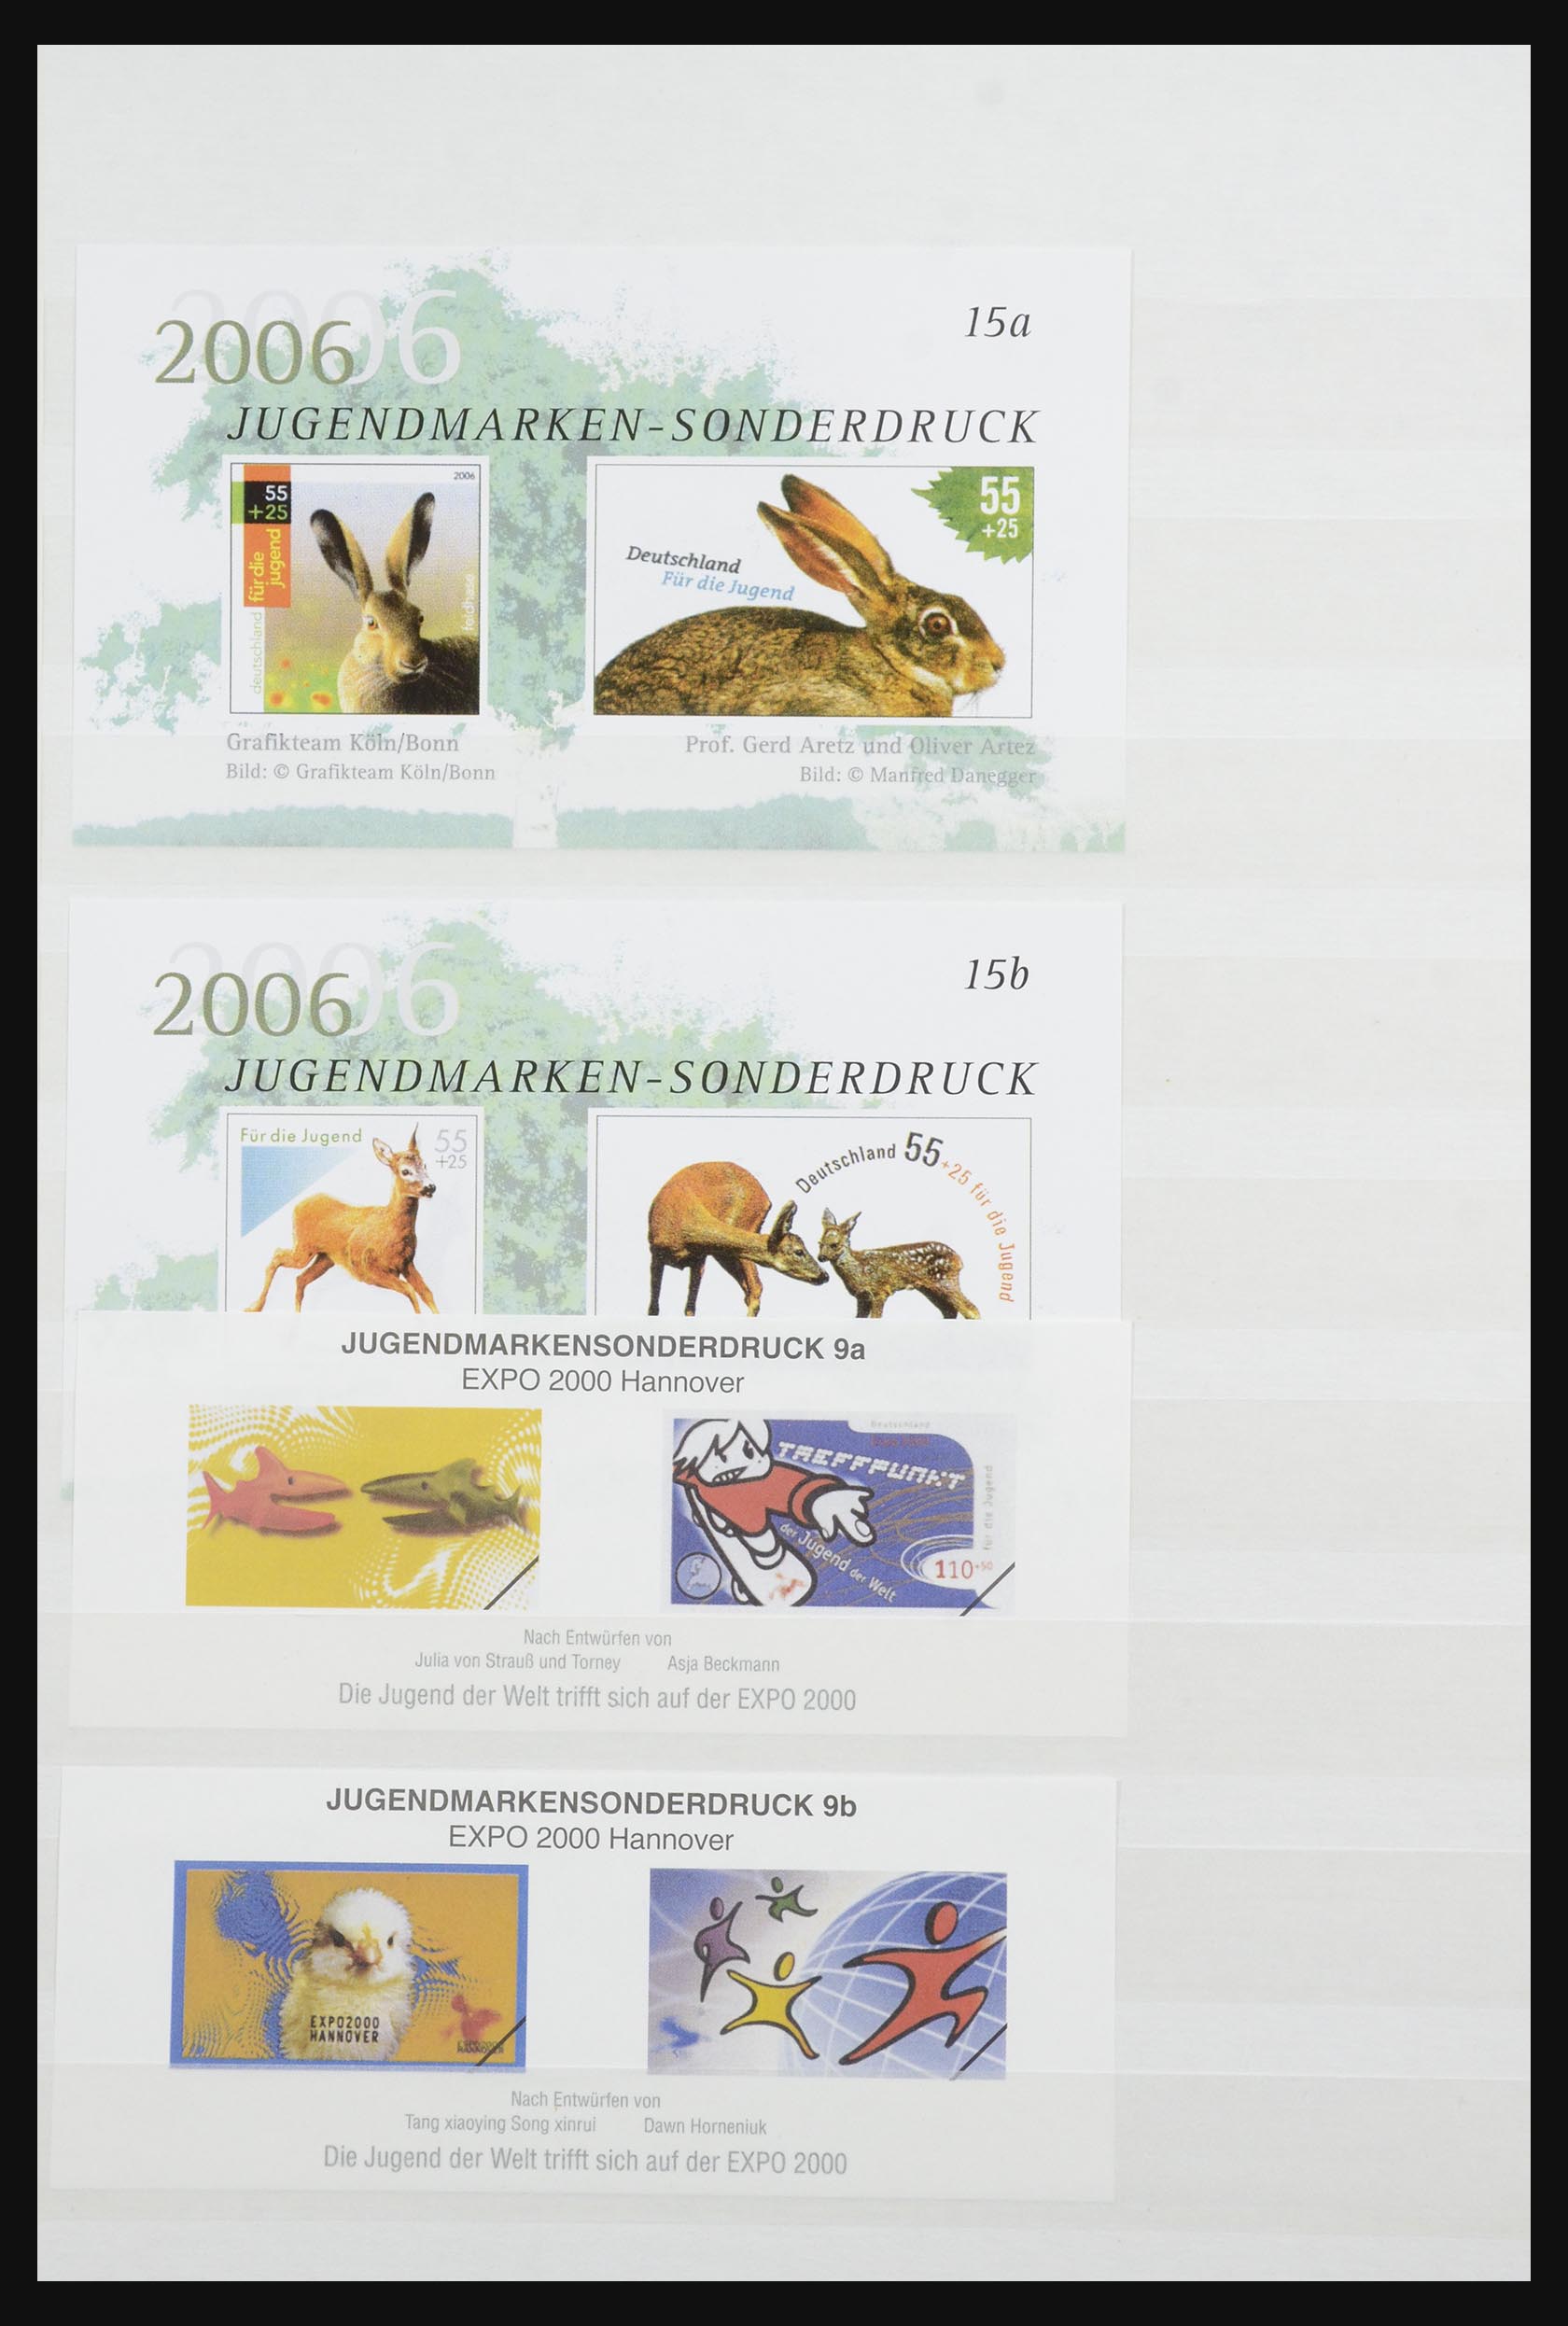 32050 018 - 32050 Bundespost special sheets 1980-2010.